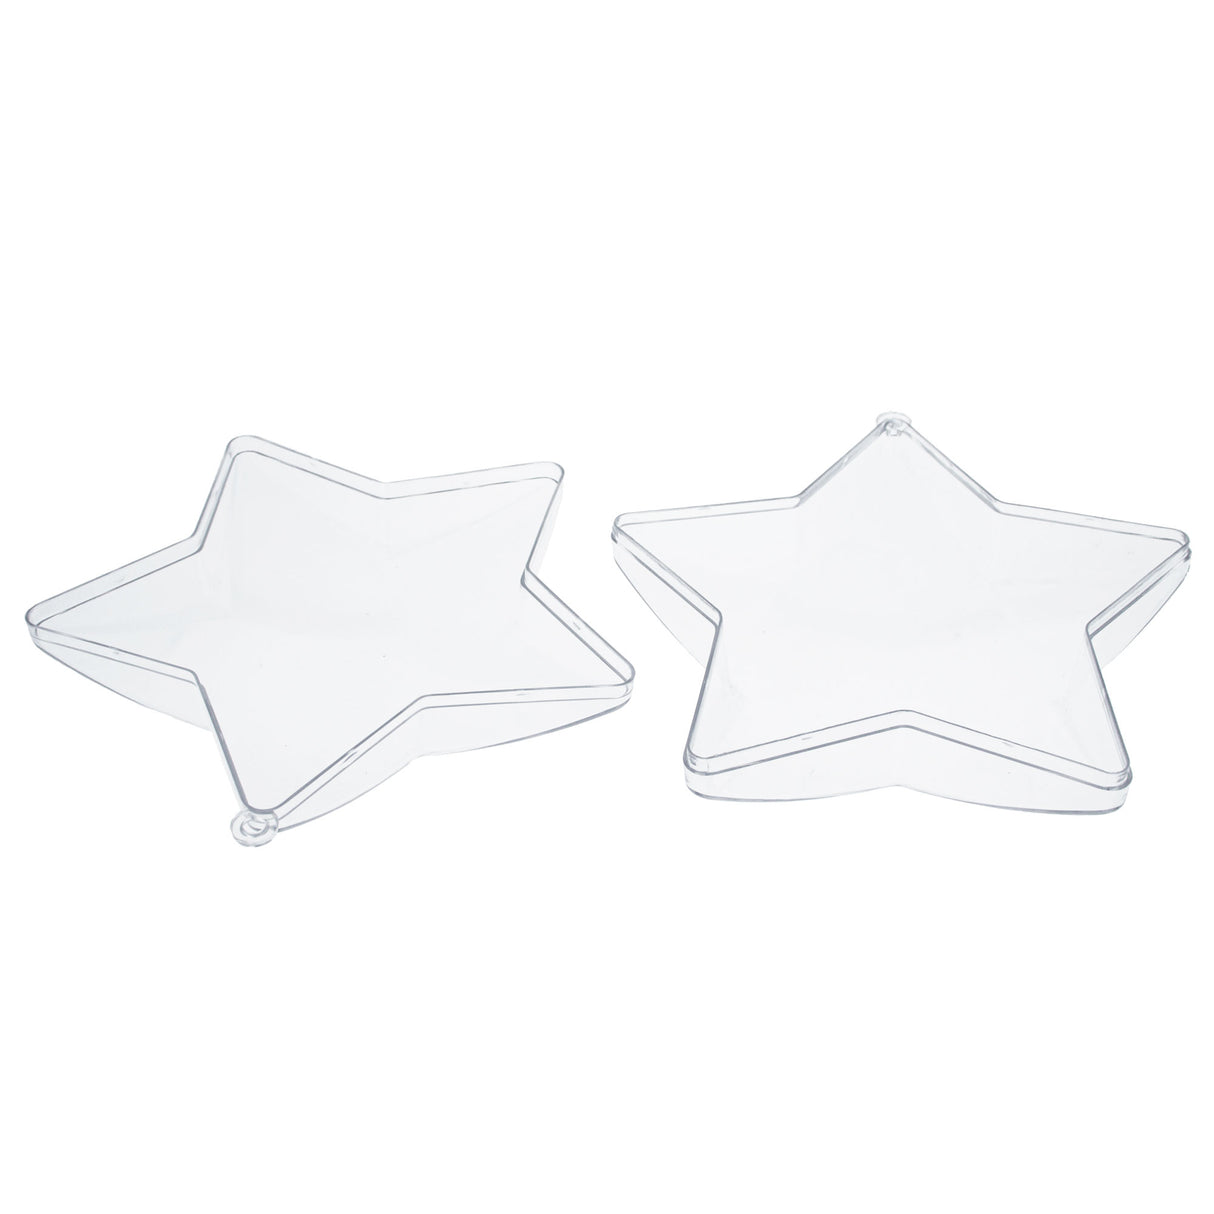 Set of 3 Clear Plastic Star Ornaments 4 Inches ,dimensions in inches: 4 x  x 1.6